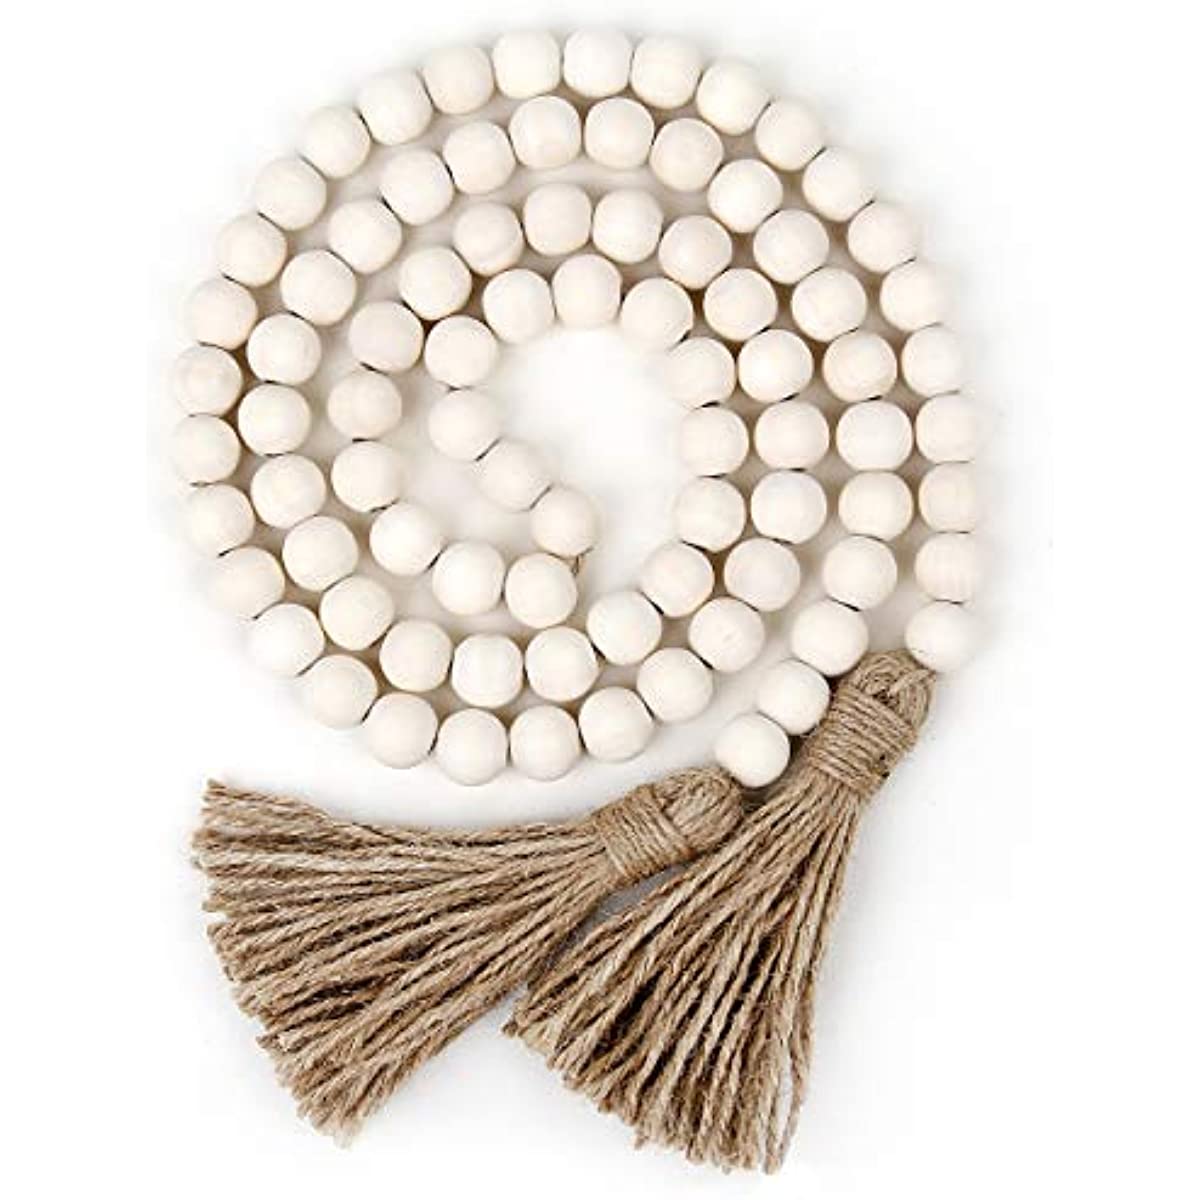 Eco-friendly Wood Bead Garland with Tassels – everything